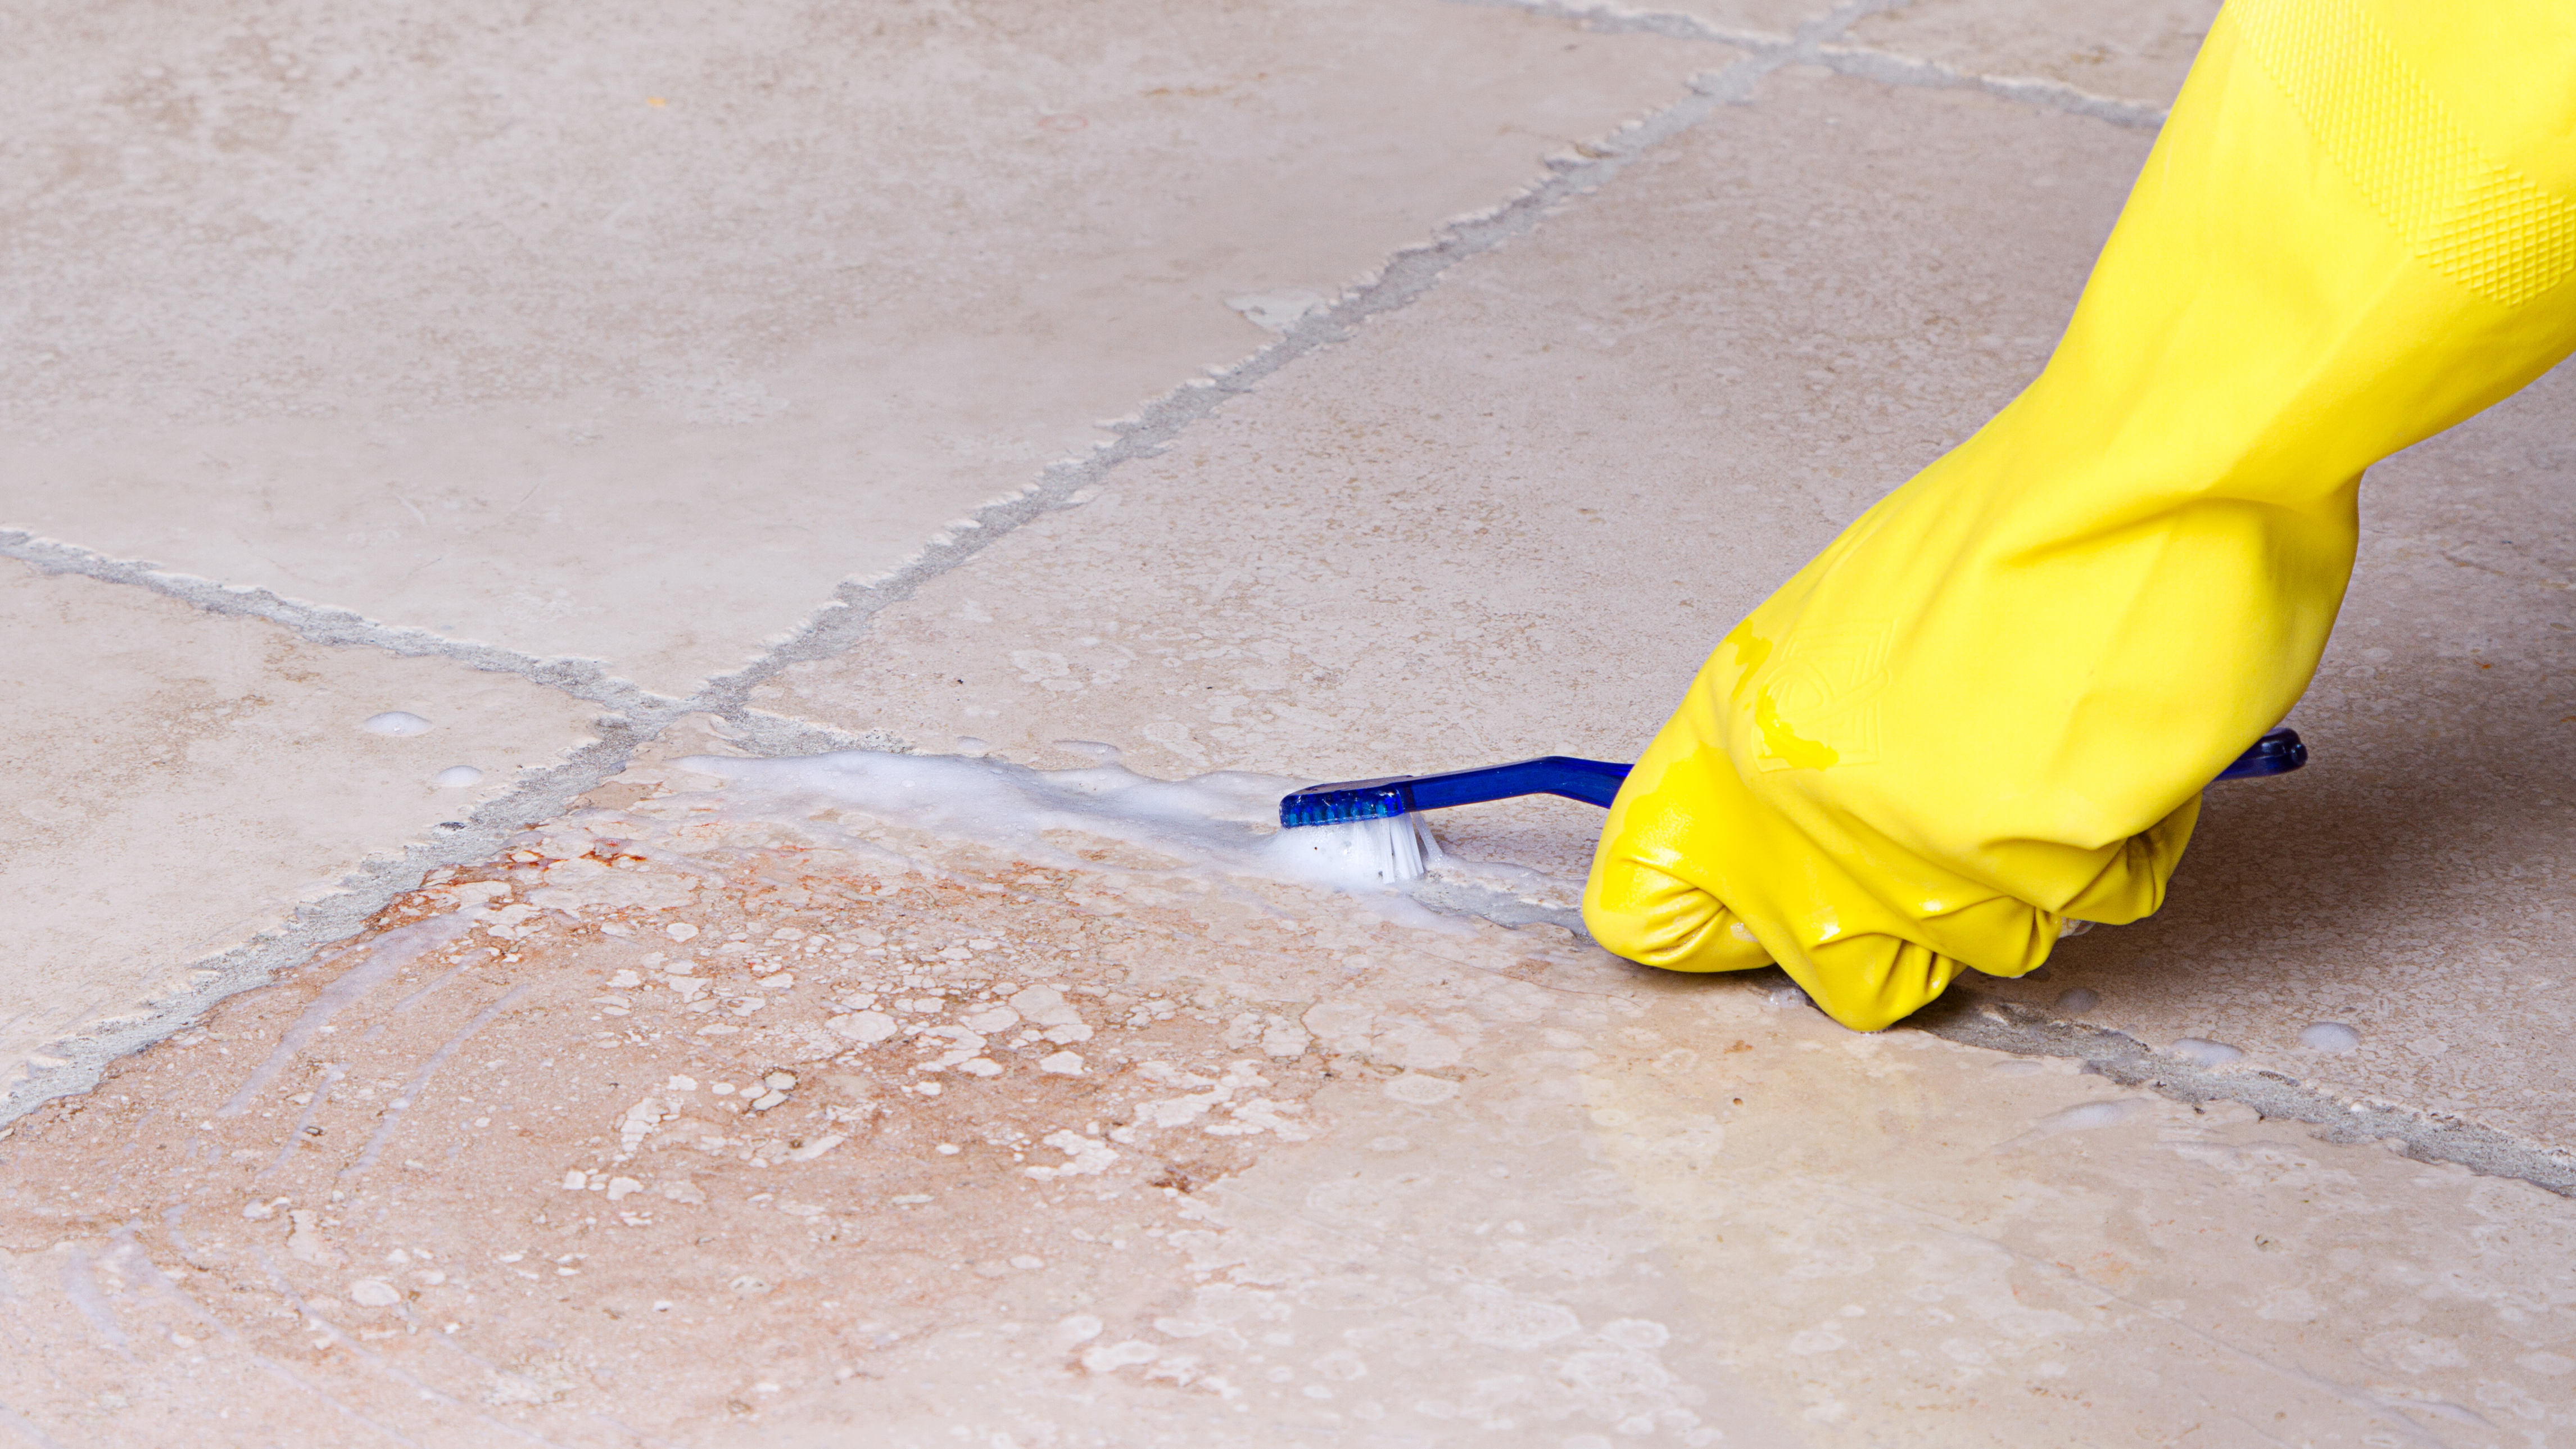 How To Clean Grout On Floor Tiles, How To Clean Floor Tile Grout Naturally